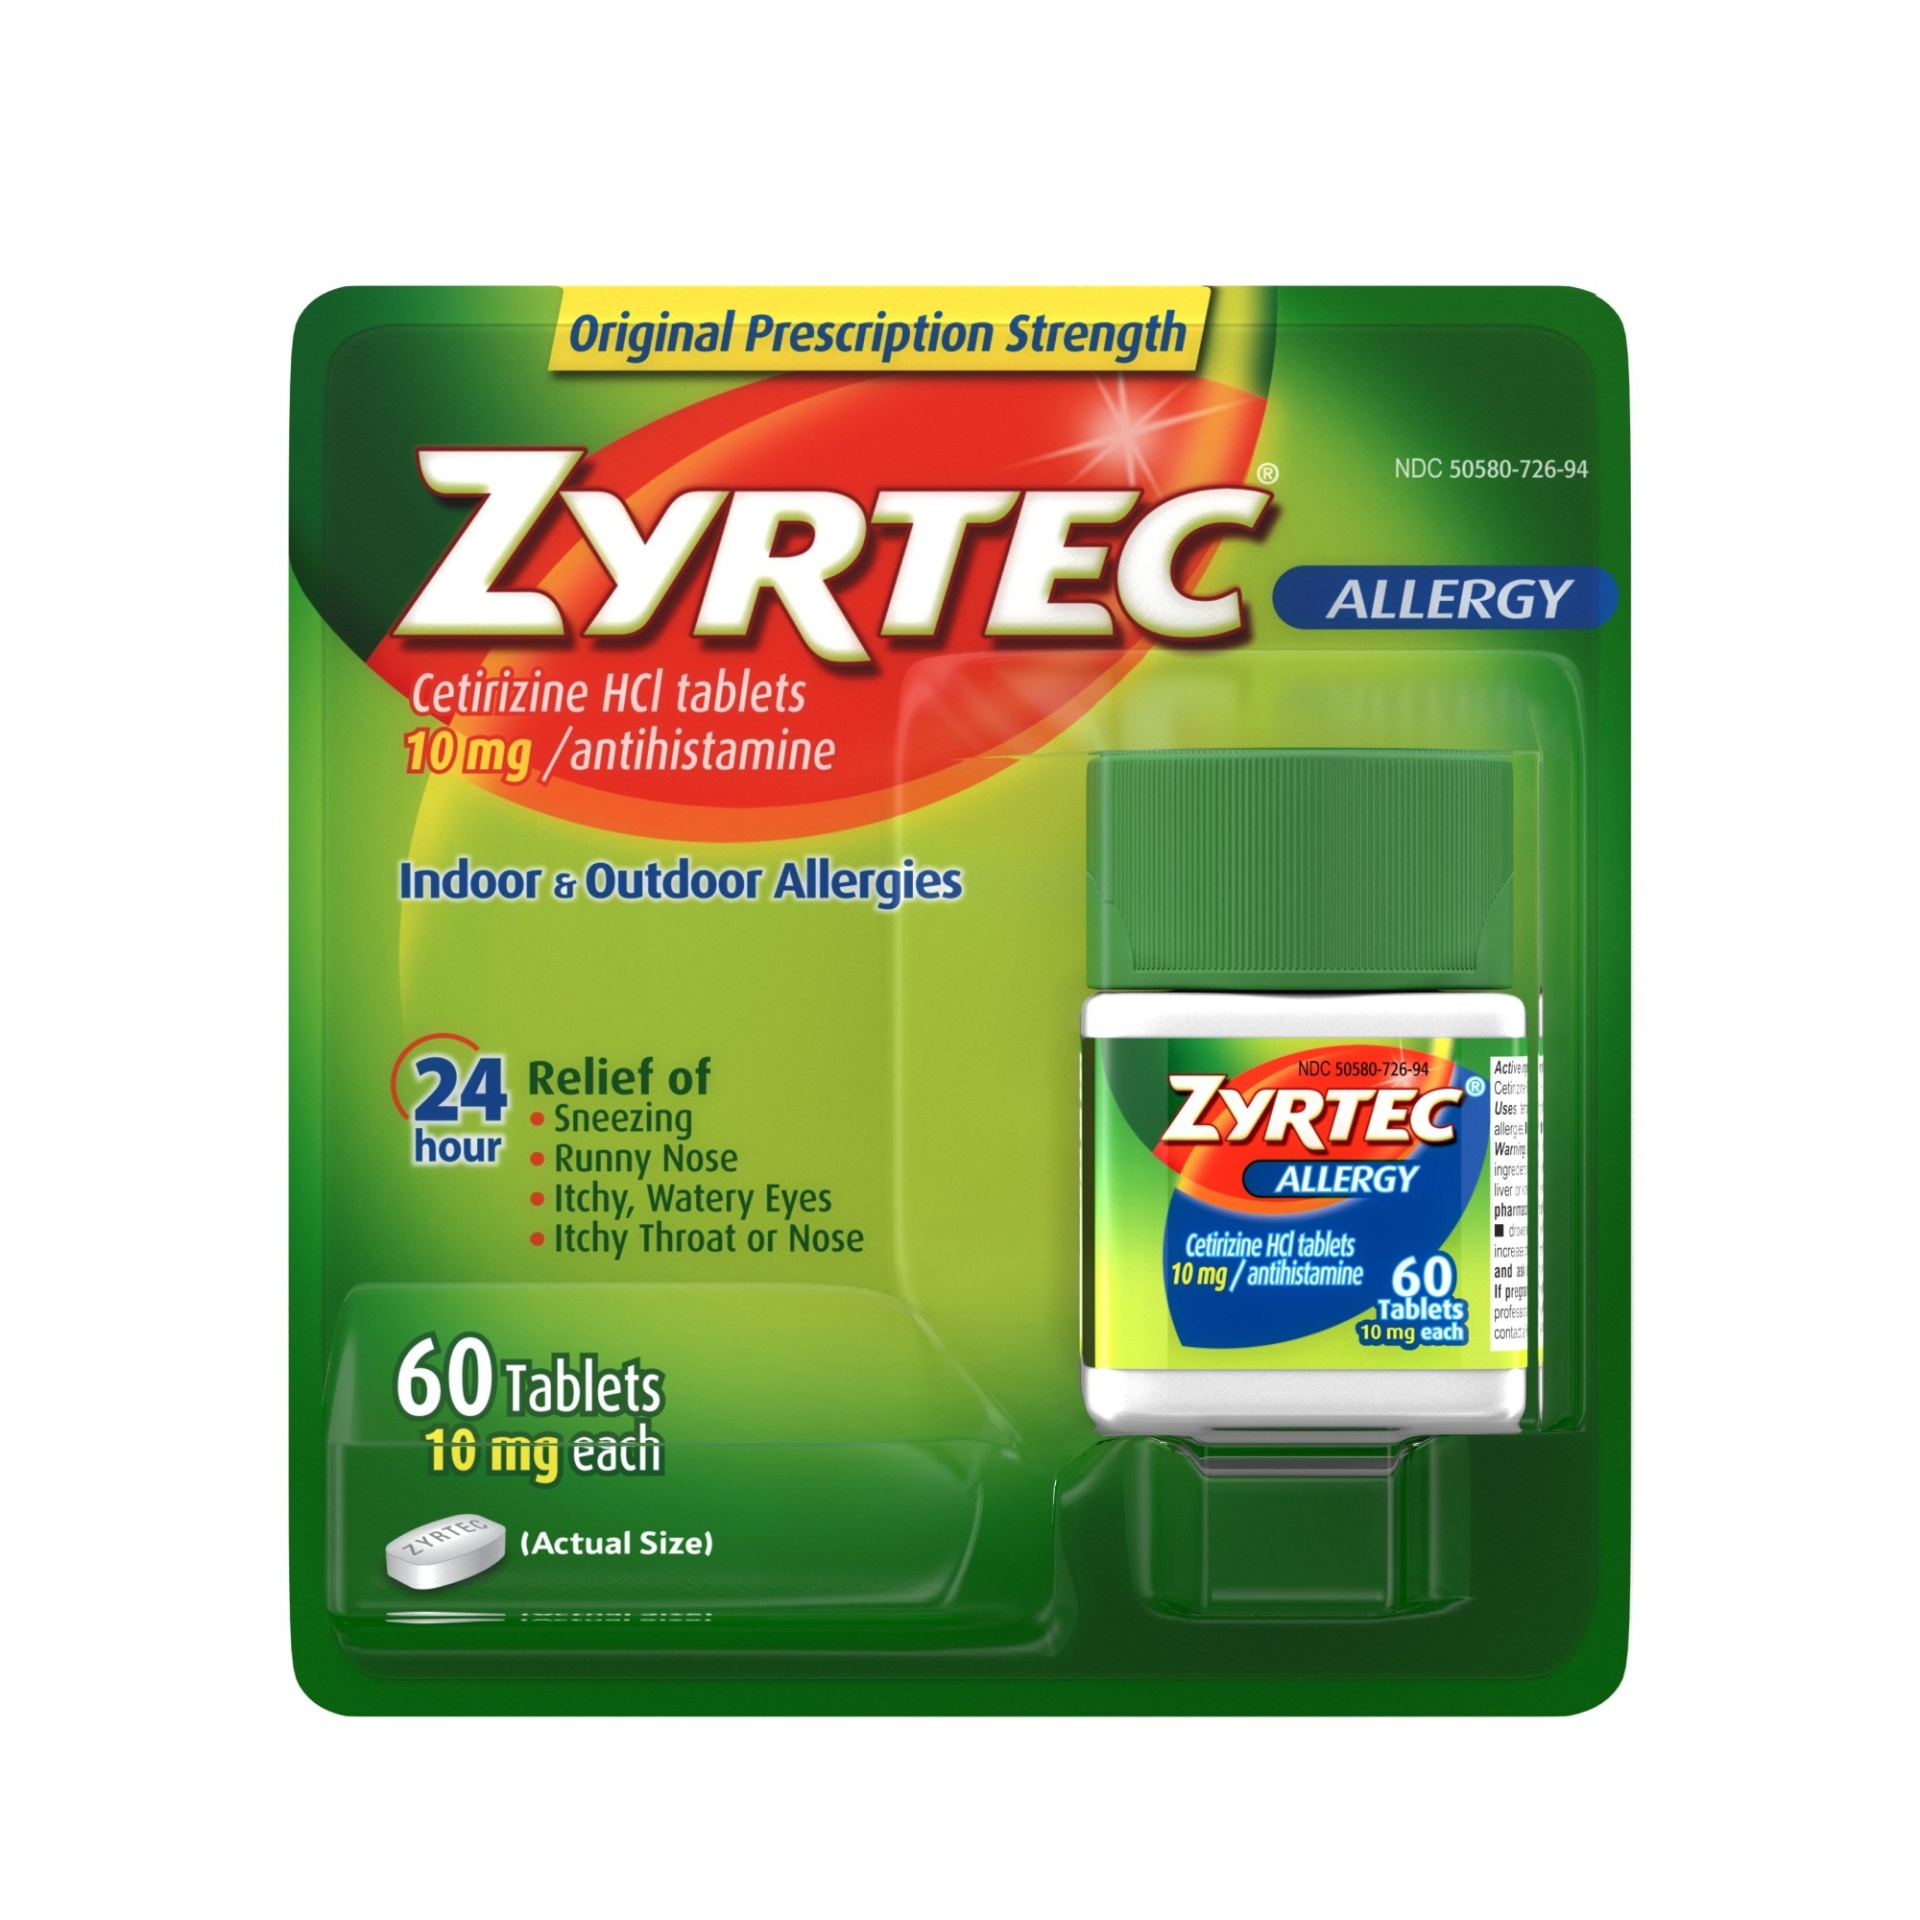 slide 1 of 4, Zyrtec 24 Hour Allergy Relief Tablets, Indoor & Outdoor Allergy Medicine with 10 mg Cetirizine HCl per Antihistamine Tablet, Relief from Runny Nose, Sneezing, Itchy Eyes & More, 60 ct